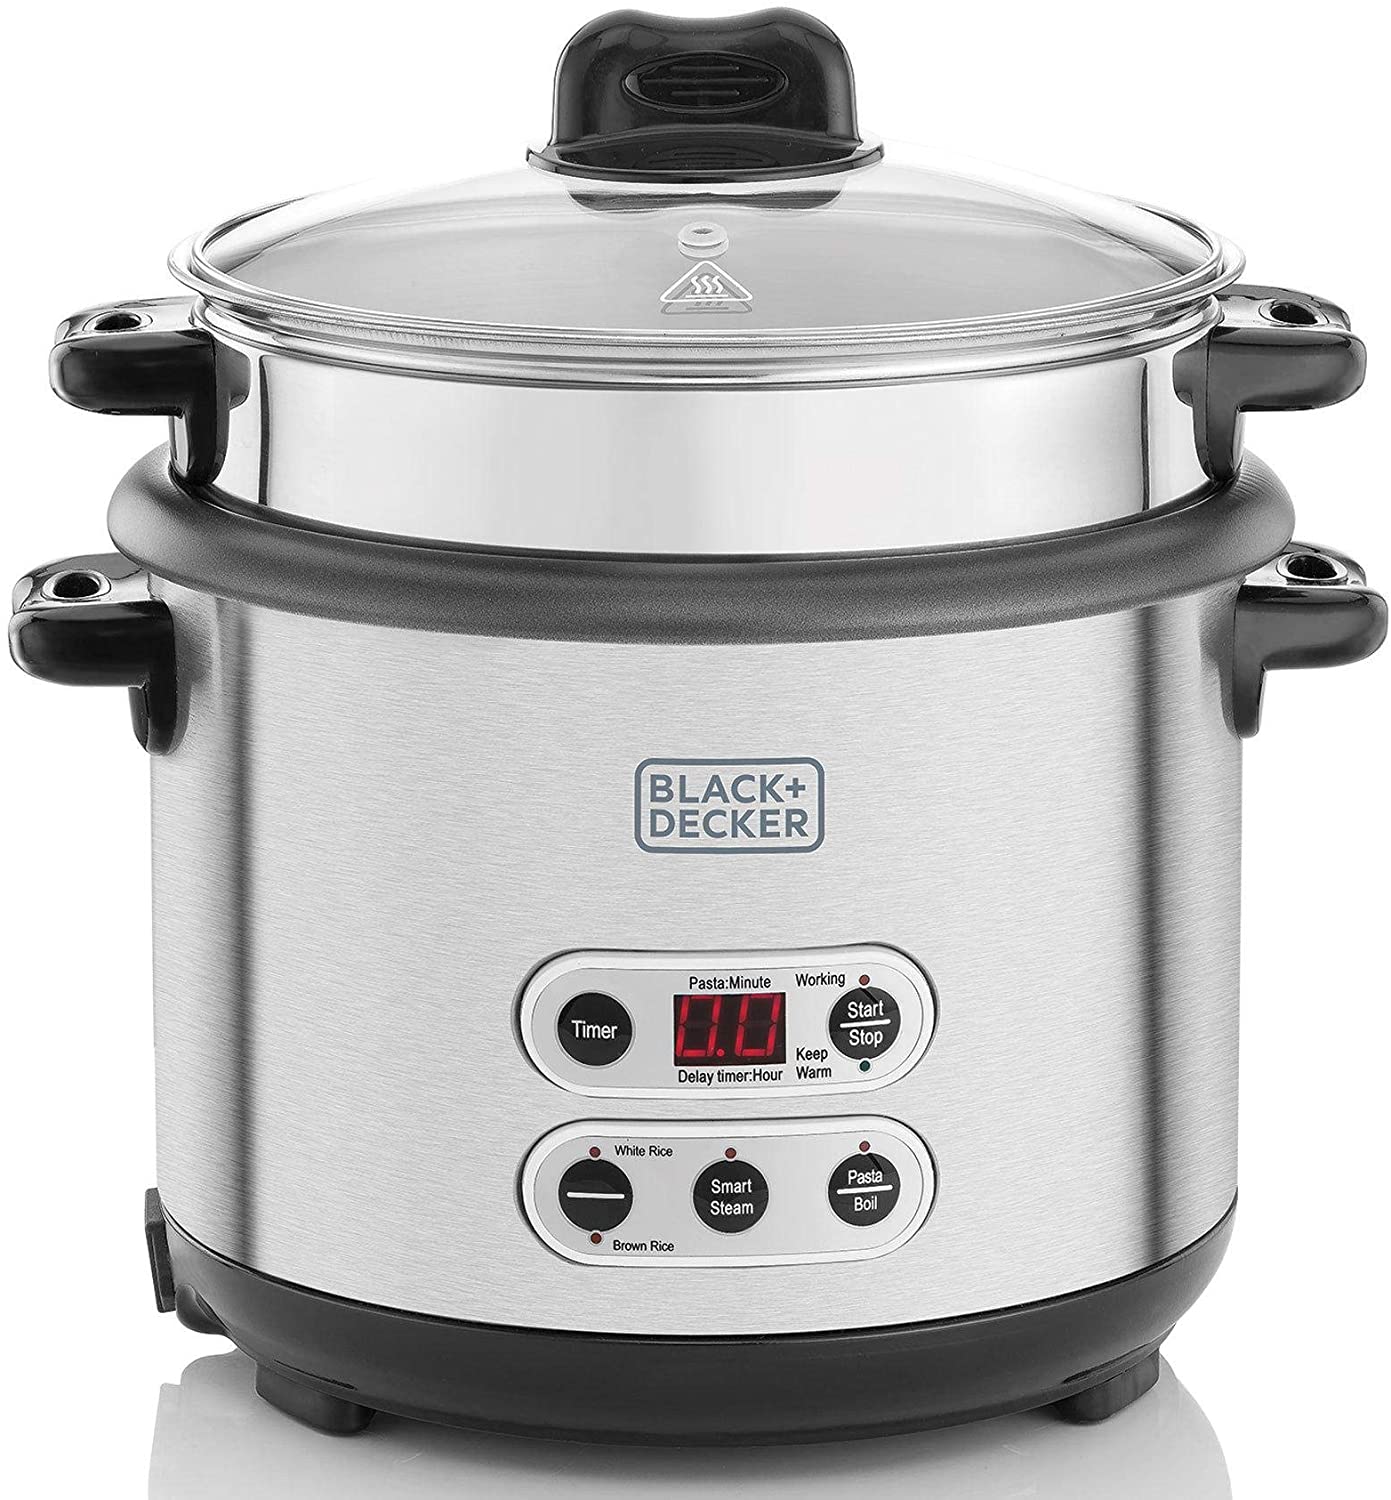 Black & Decker RPC1800-B5 1.8-Liter Automatic Rice and Pasta Cooker